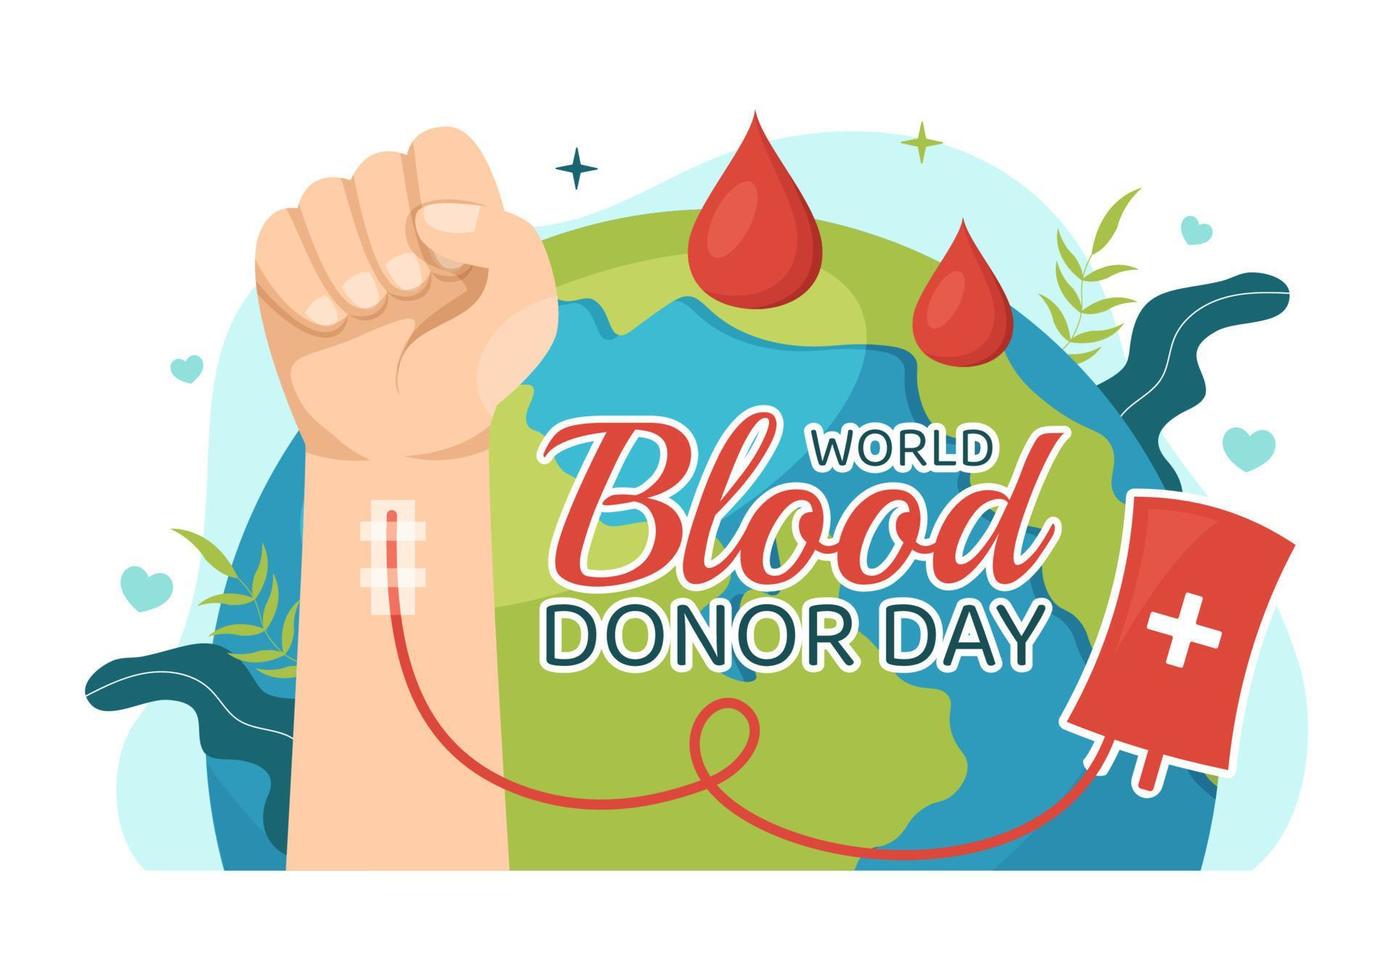 World Blood Donor Day on June 14 Illustration with Human Donated Bloods for Give the Recipient in Save Life Flat Cartoon Hand Drawn Templates vector